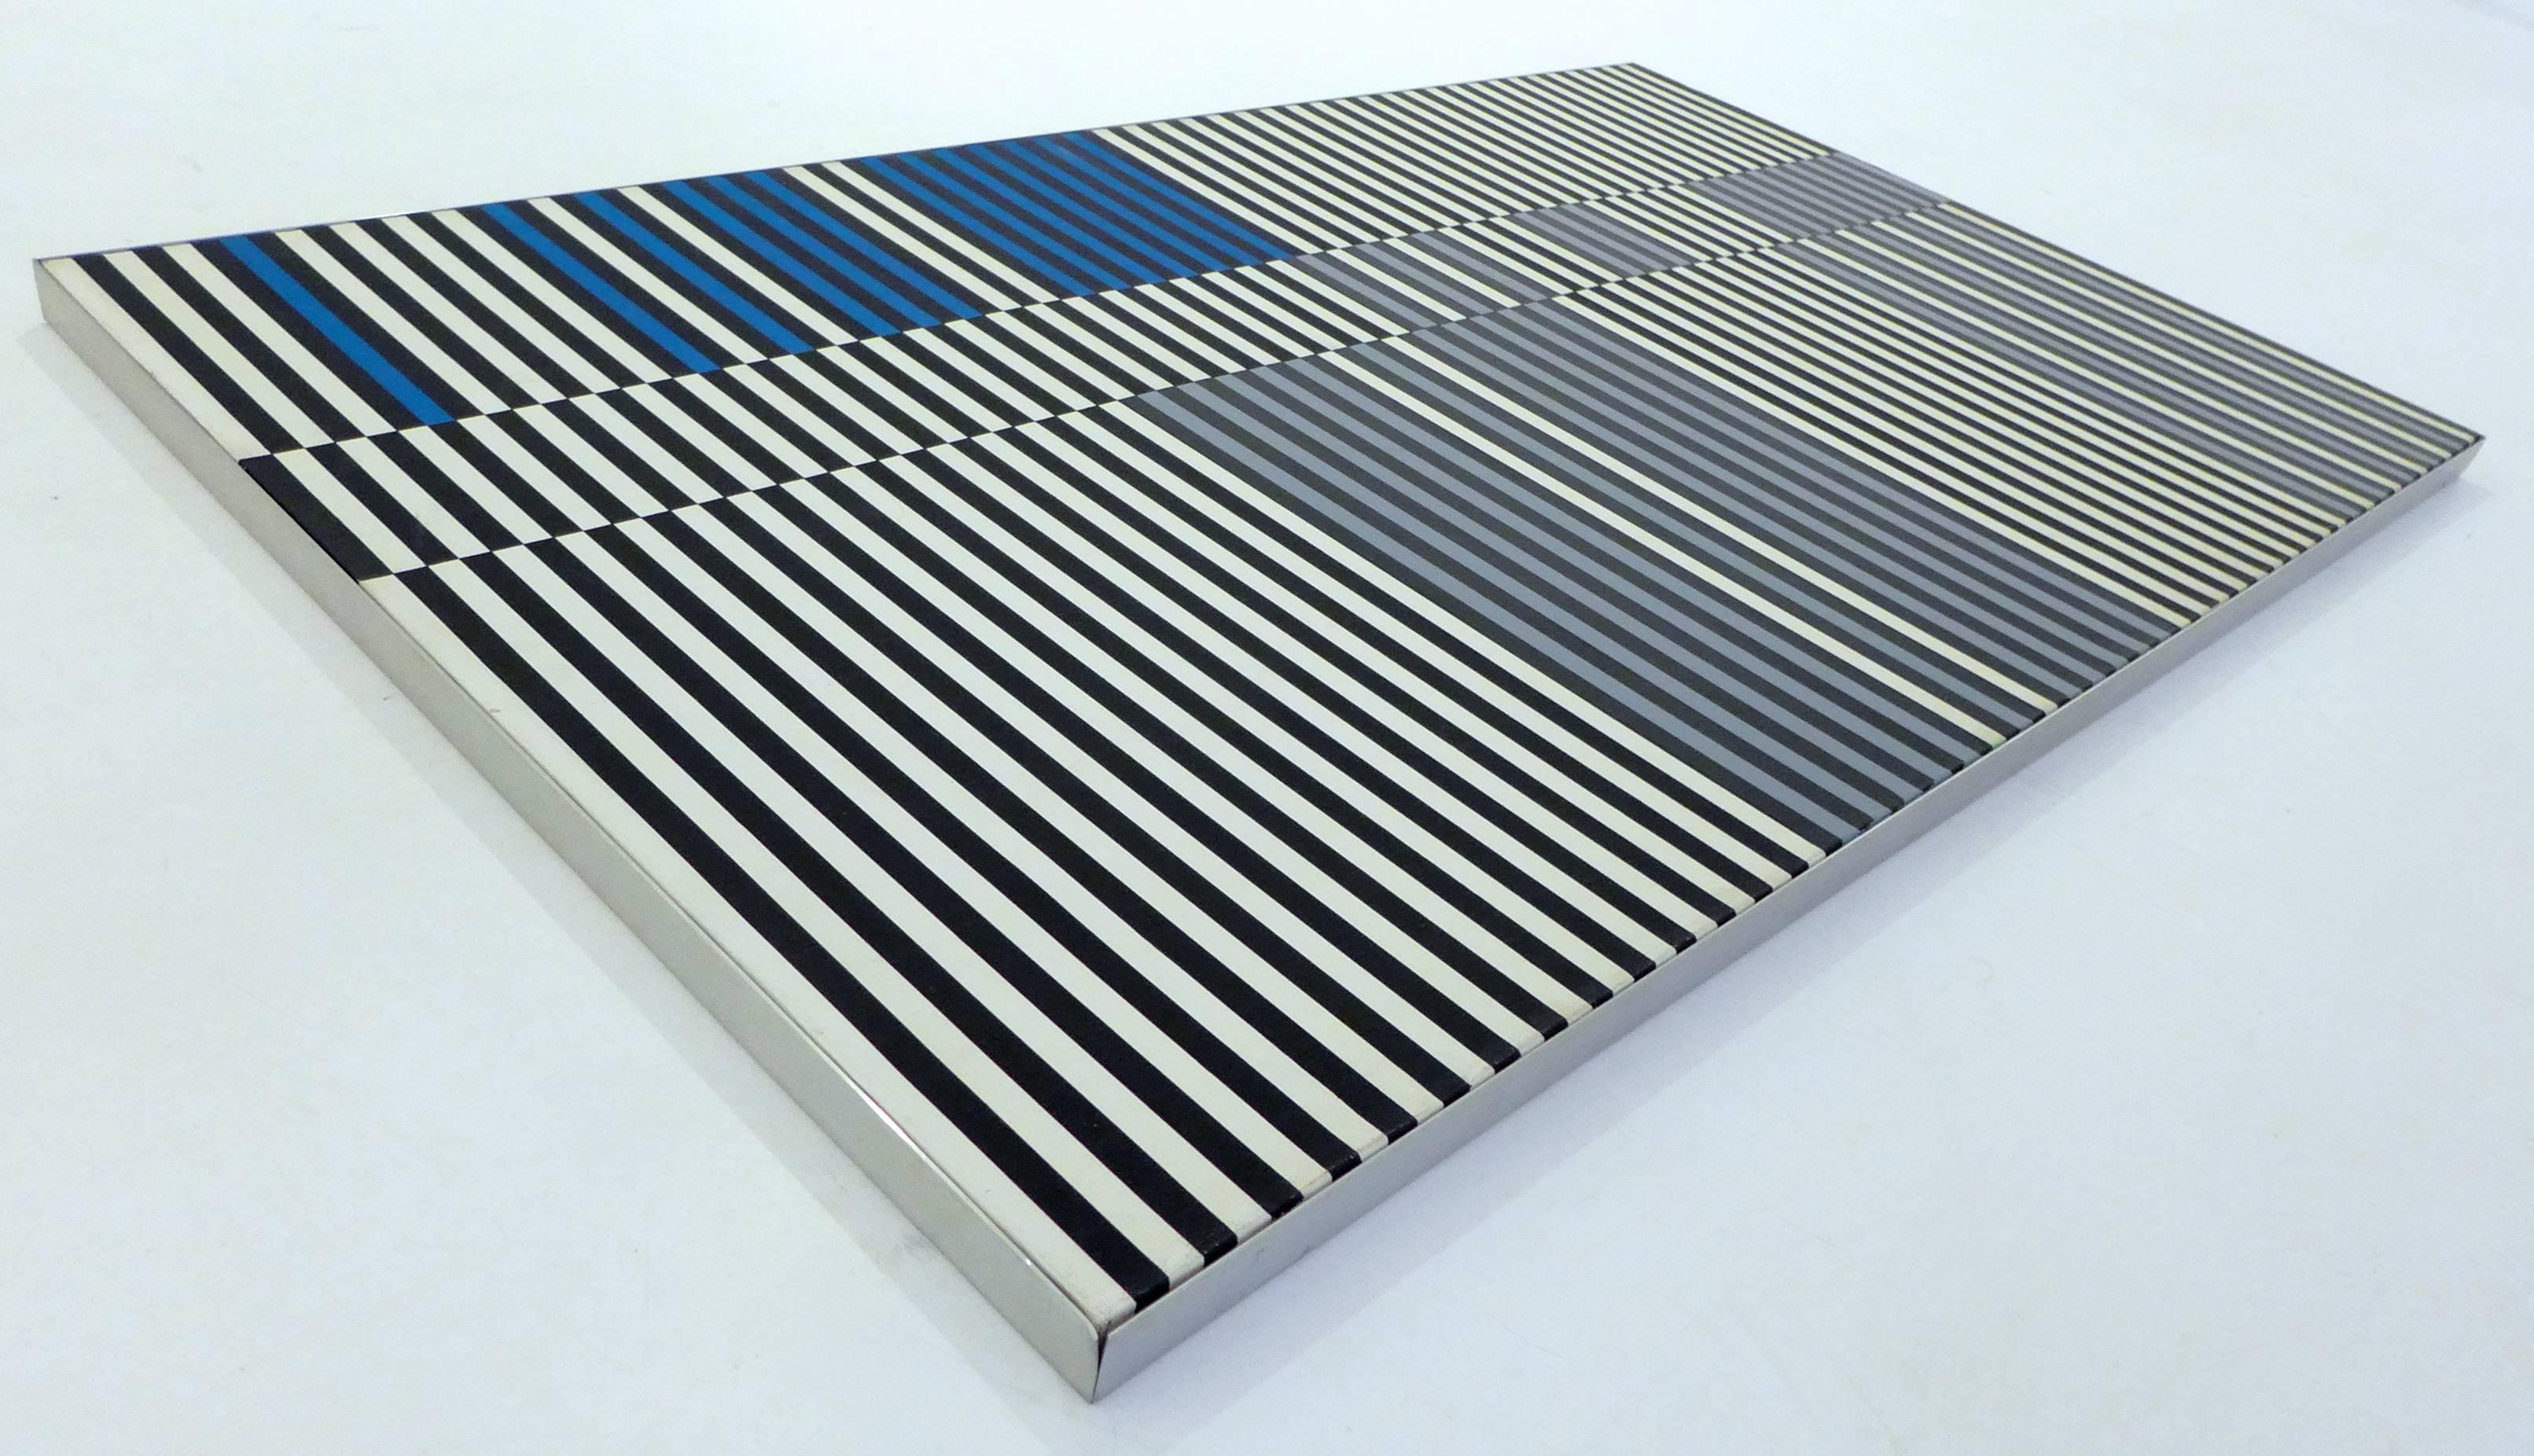 Technically precise stripe painting in black, white, blue and gray, from her 